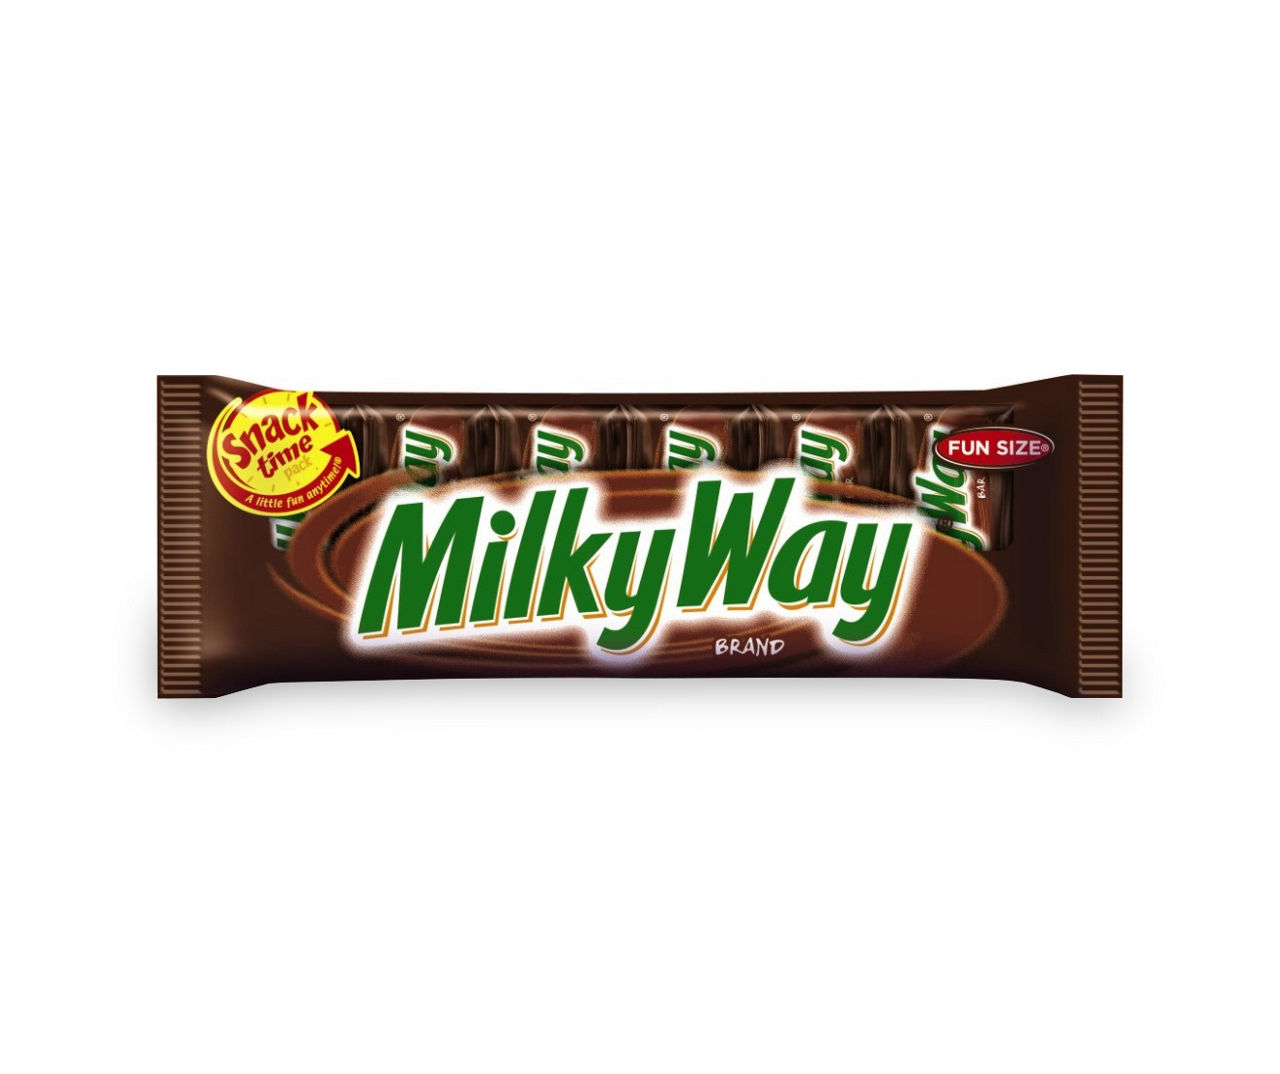 MILKY WAY Milk Chocolate Fun Size Candy Bars, 3.36 oz Bag (Pack of 6)